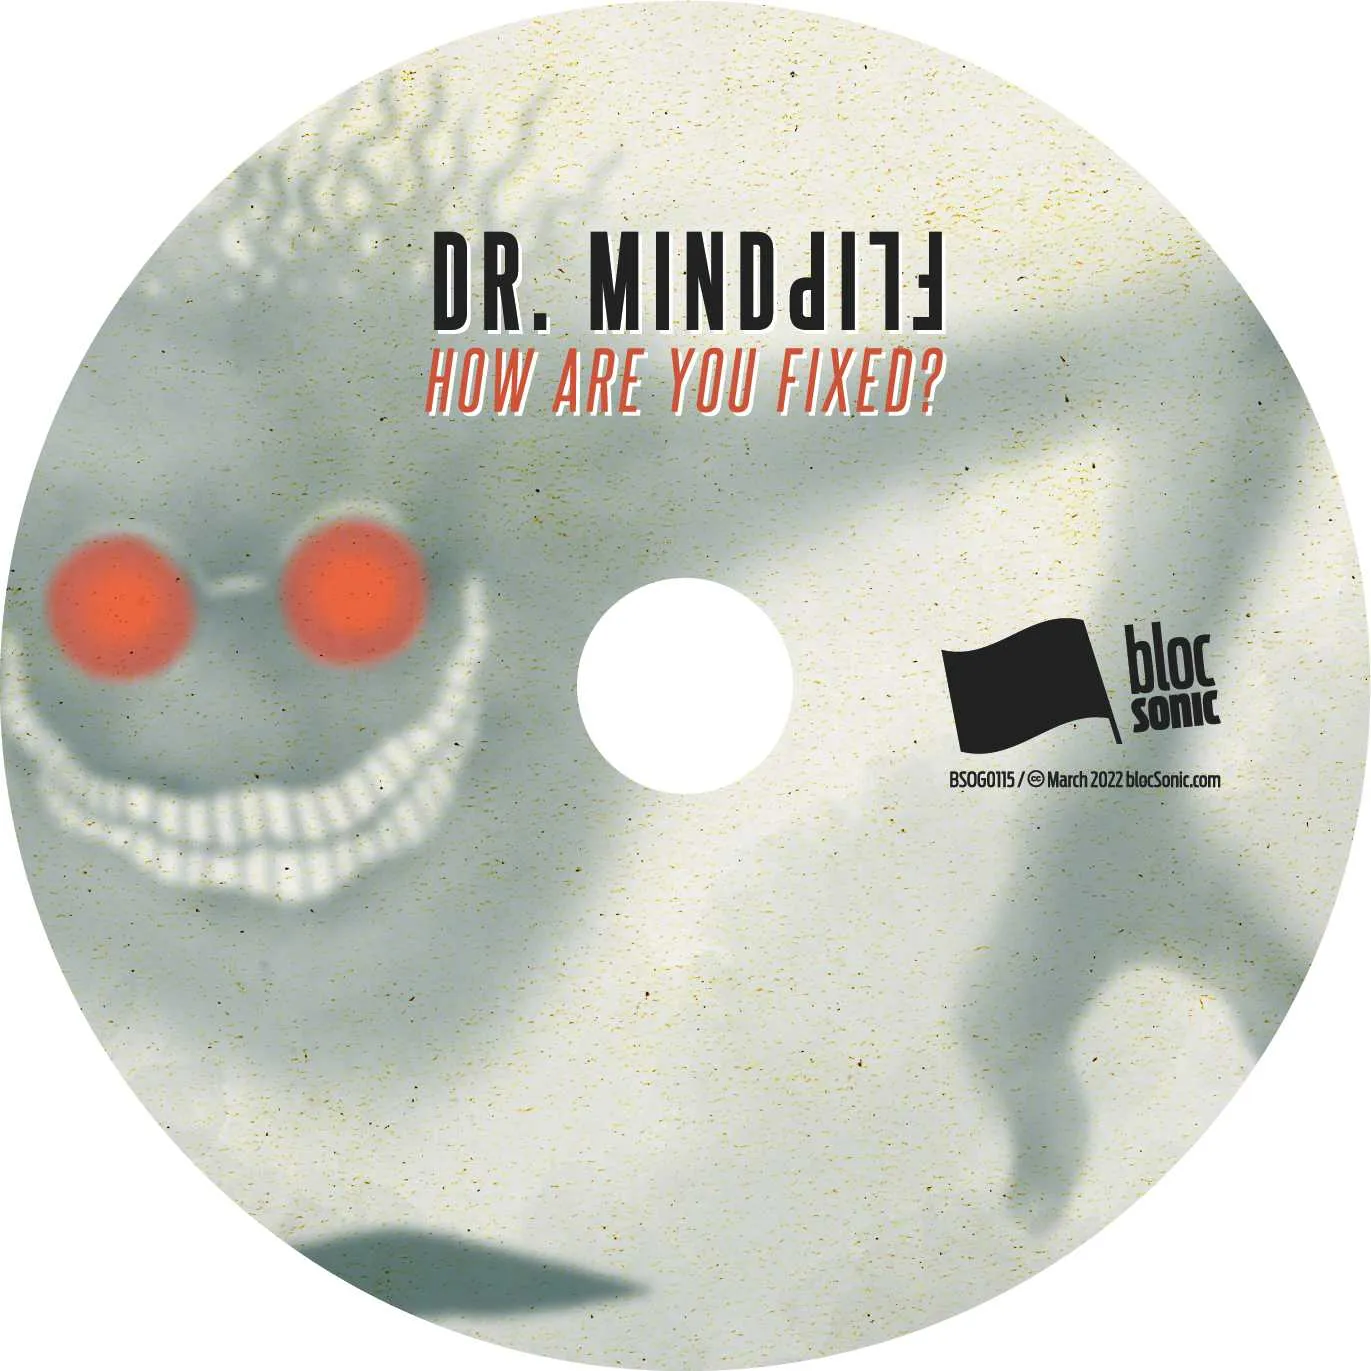 Album disc for “How are you fixed?” by Dr. Mindflip